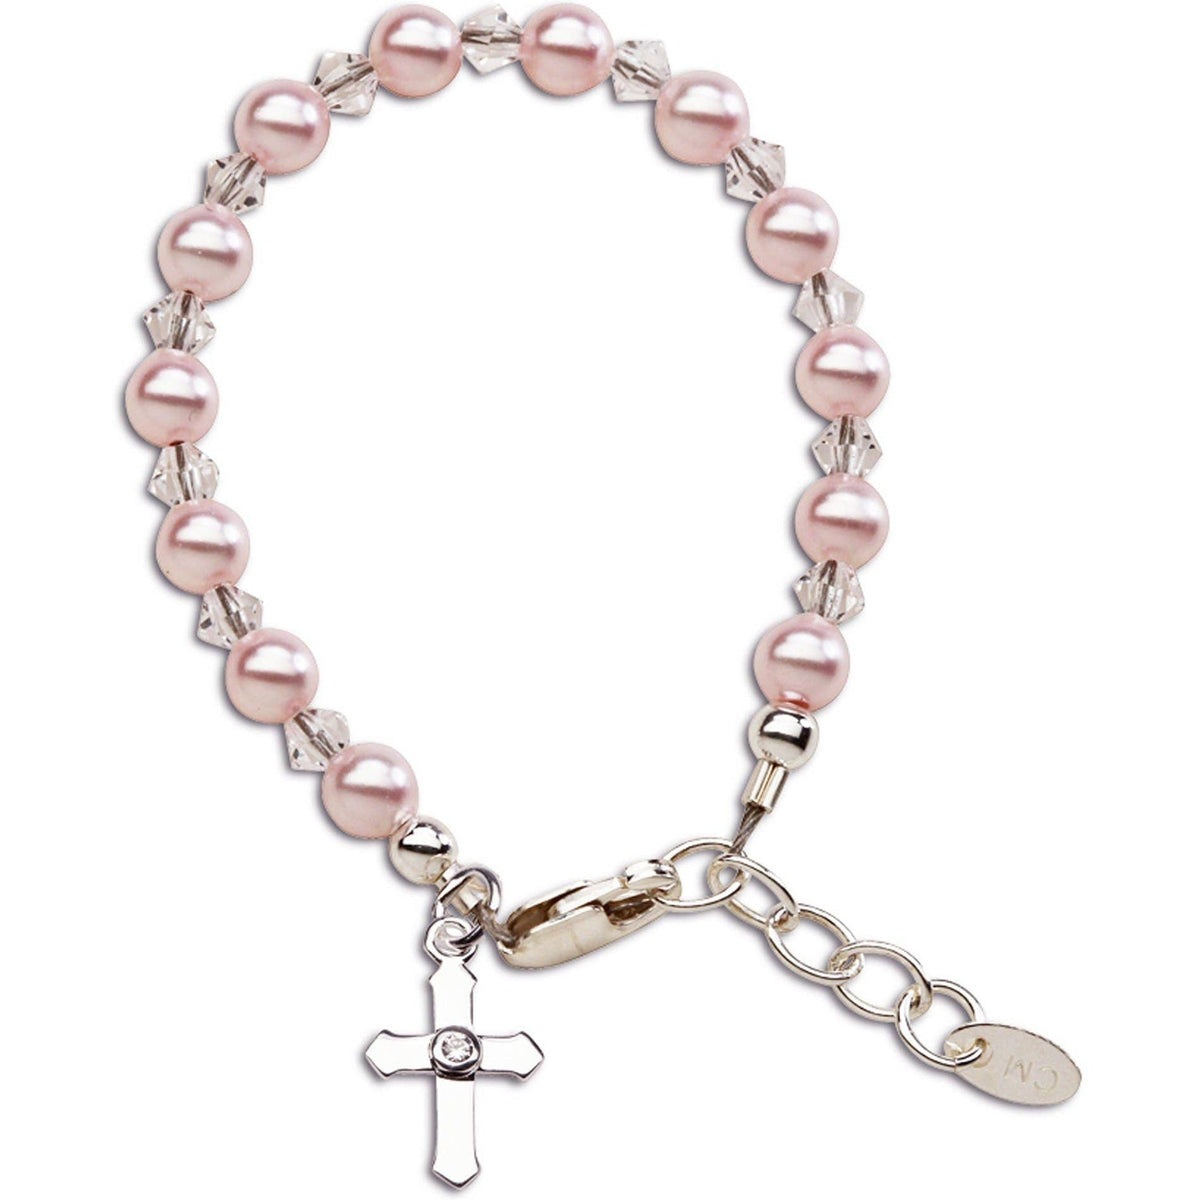 Cherished Moments Bella Sterling Silver Pearl Cross Baby or Child's Bracelet